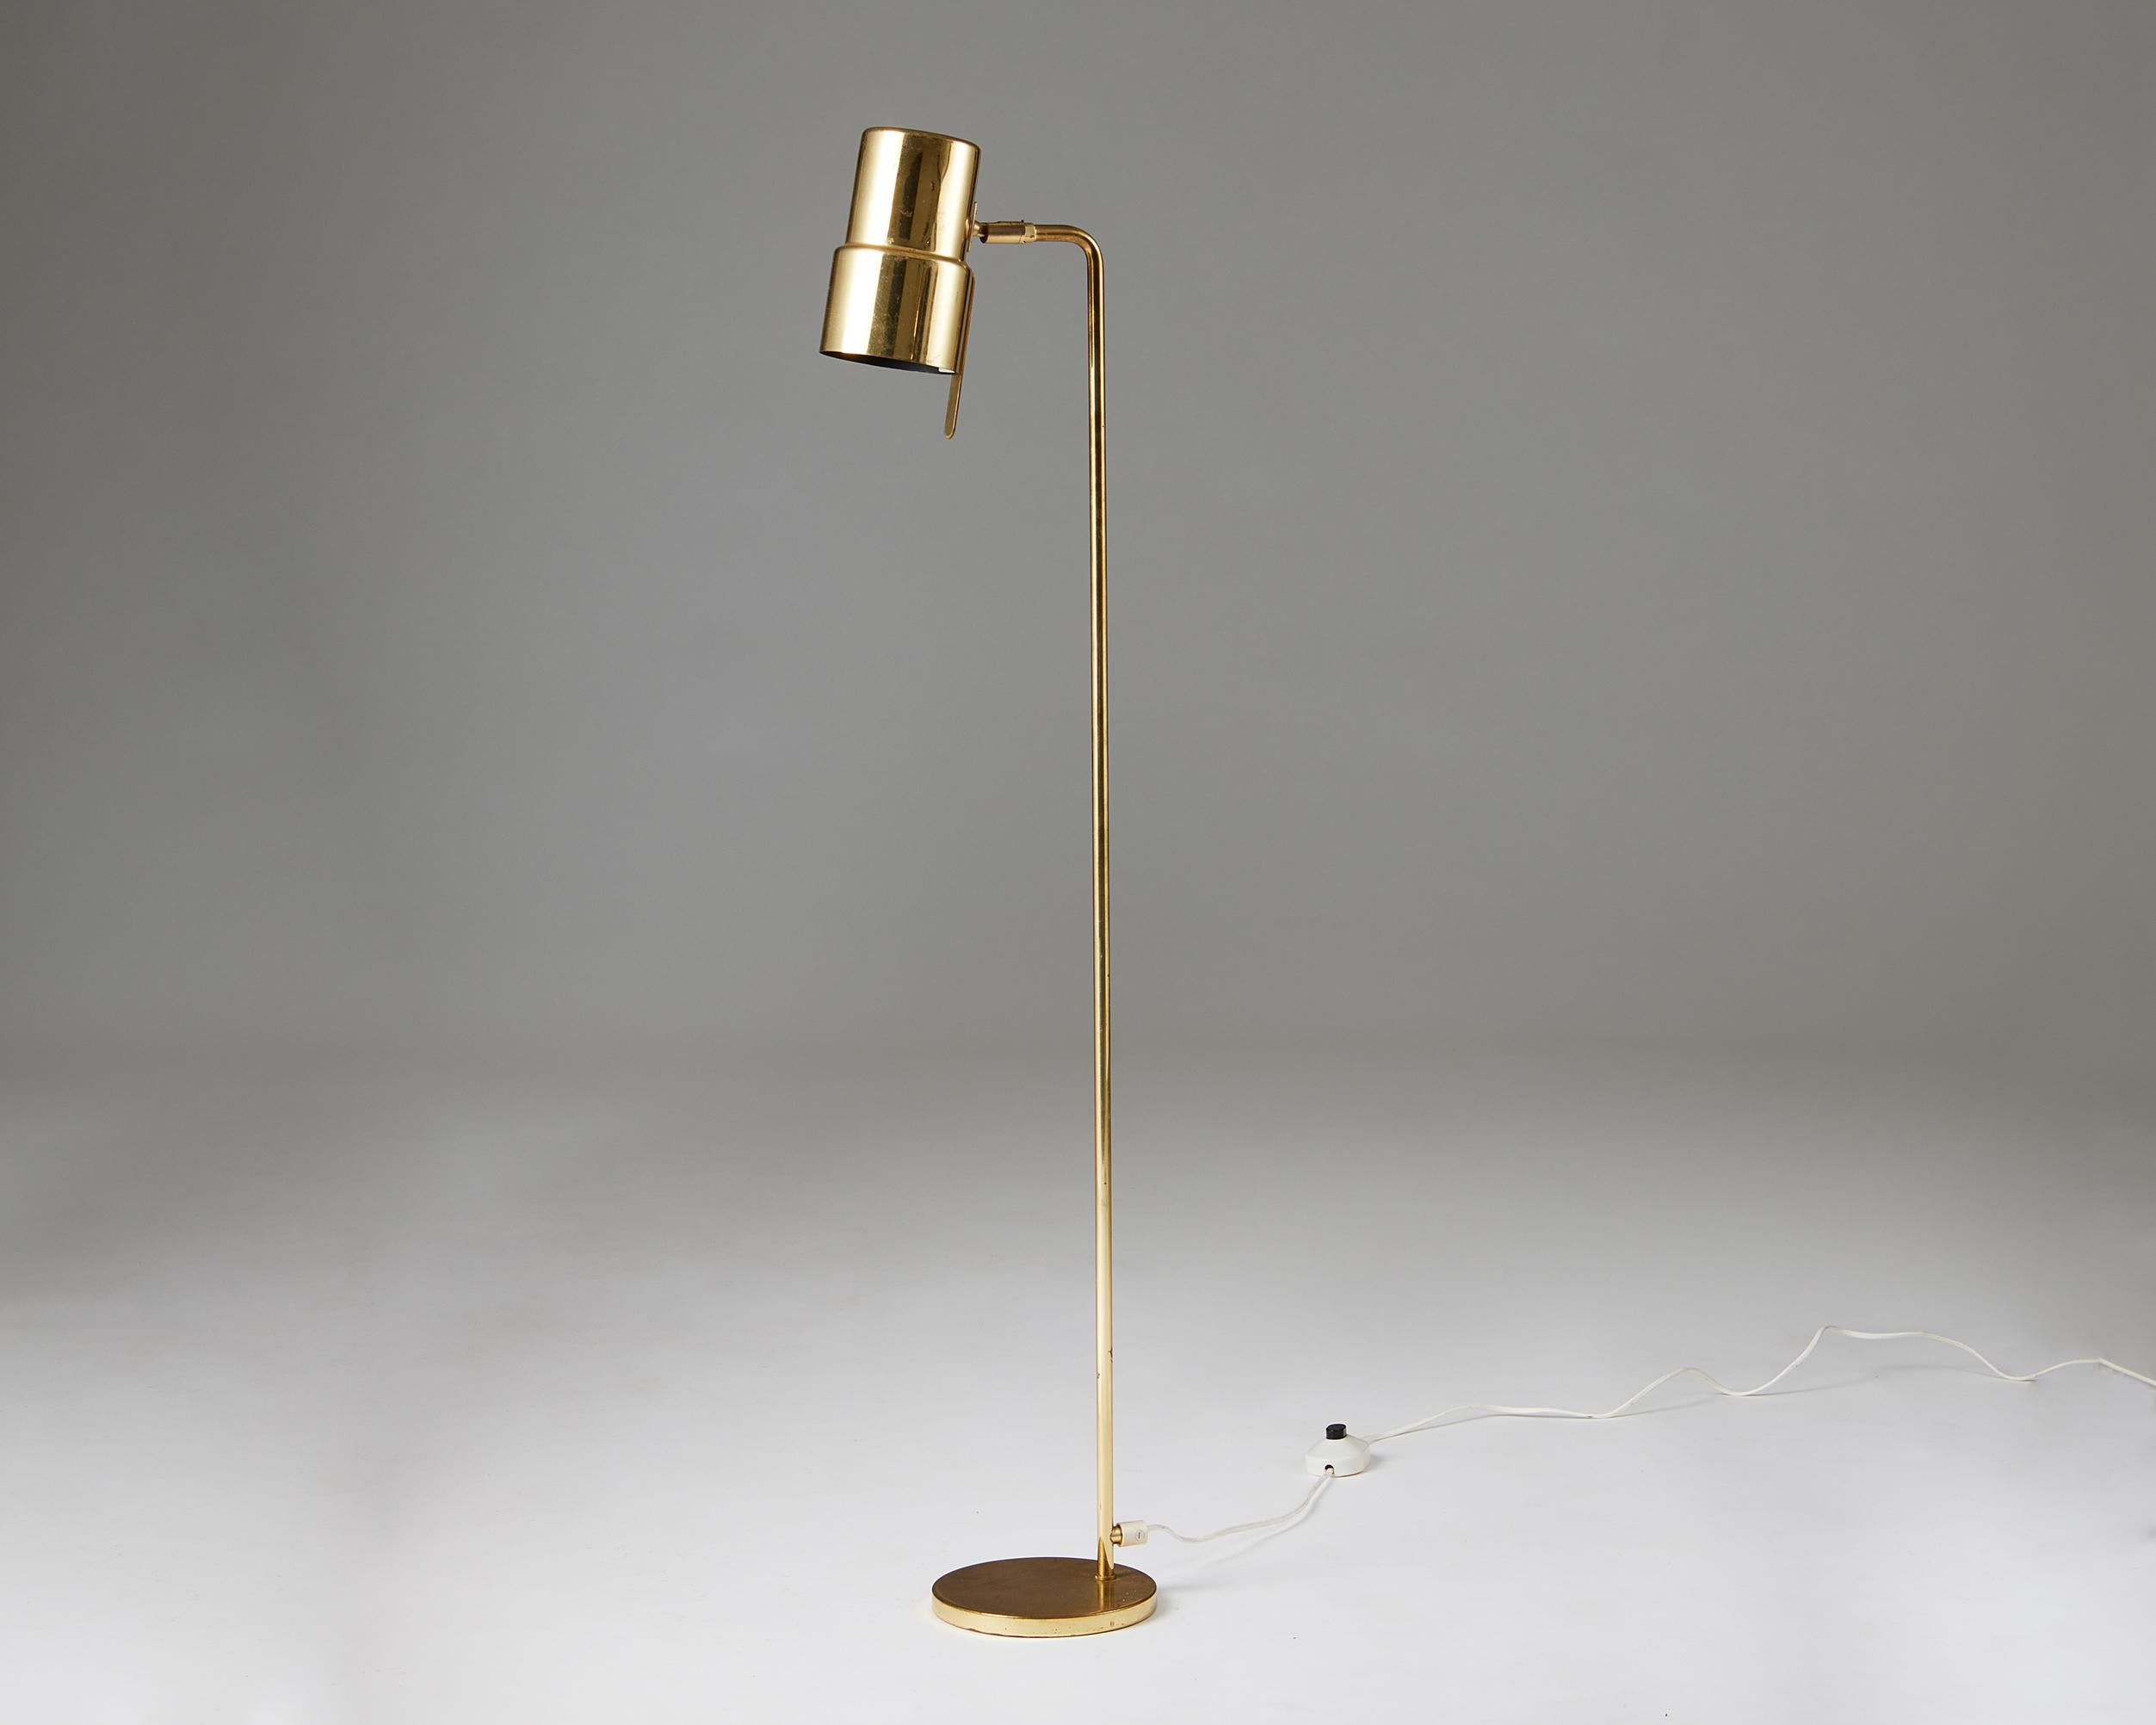 Floor lamp G-154 designed by Hans-Agne Jakobsson,
Sweden. 1960s.
Polished brass.

Adjustable shade.

Active between the 1950’s and 1970’s—in the golden age of Scandinavian design—Swedish interior decorator and furniture designer Hans-Agne